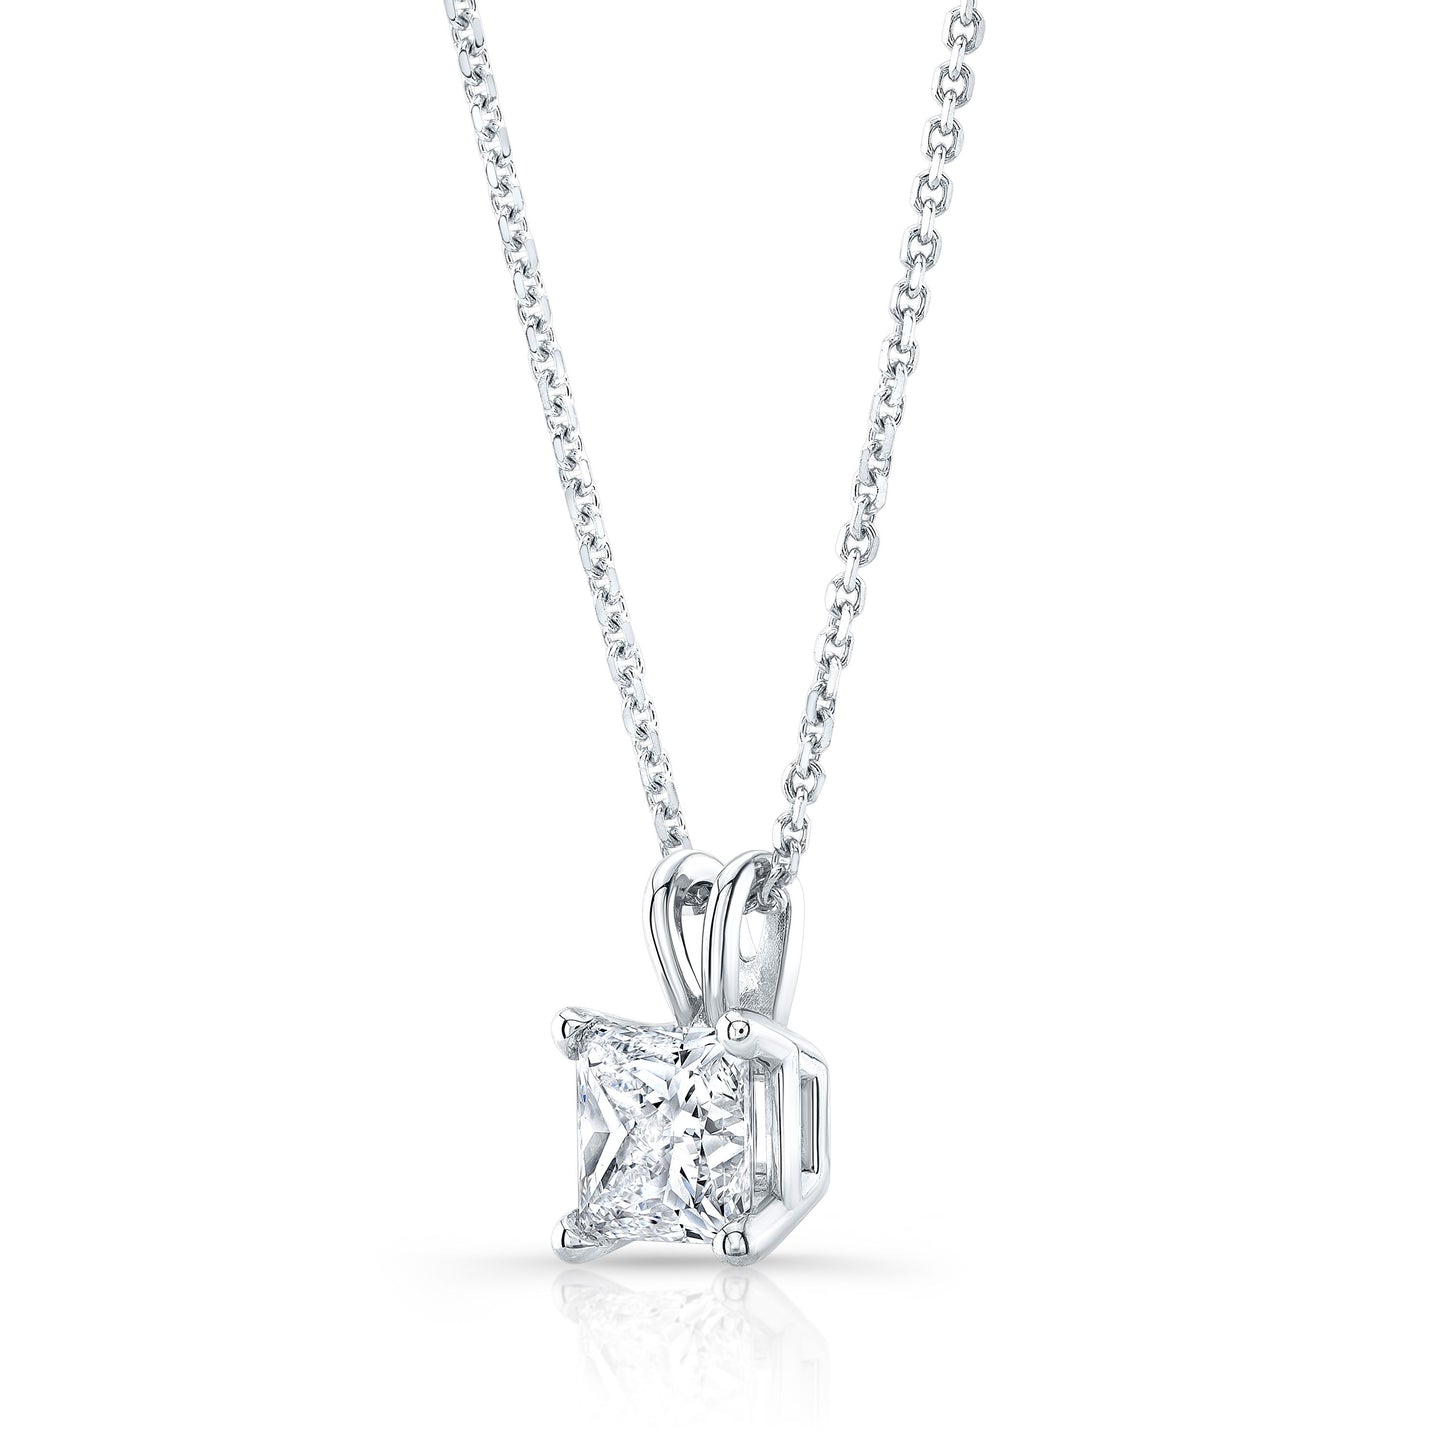 Princess Diamond Solitaire Pendant In A 14k White Gold 4-prong Basket Setting, 1.25ct. T.w. (hi, Si1-si2)